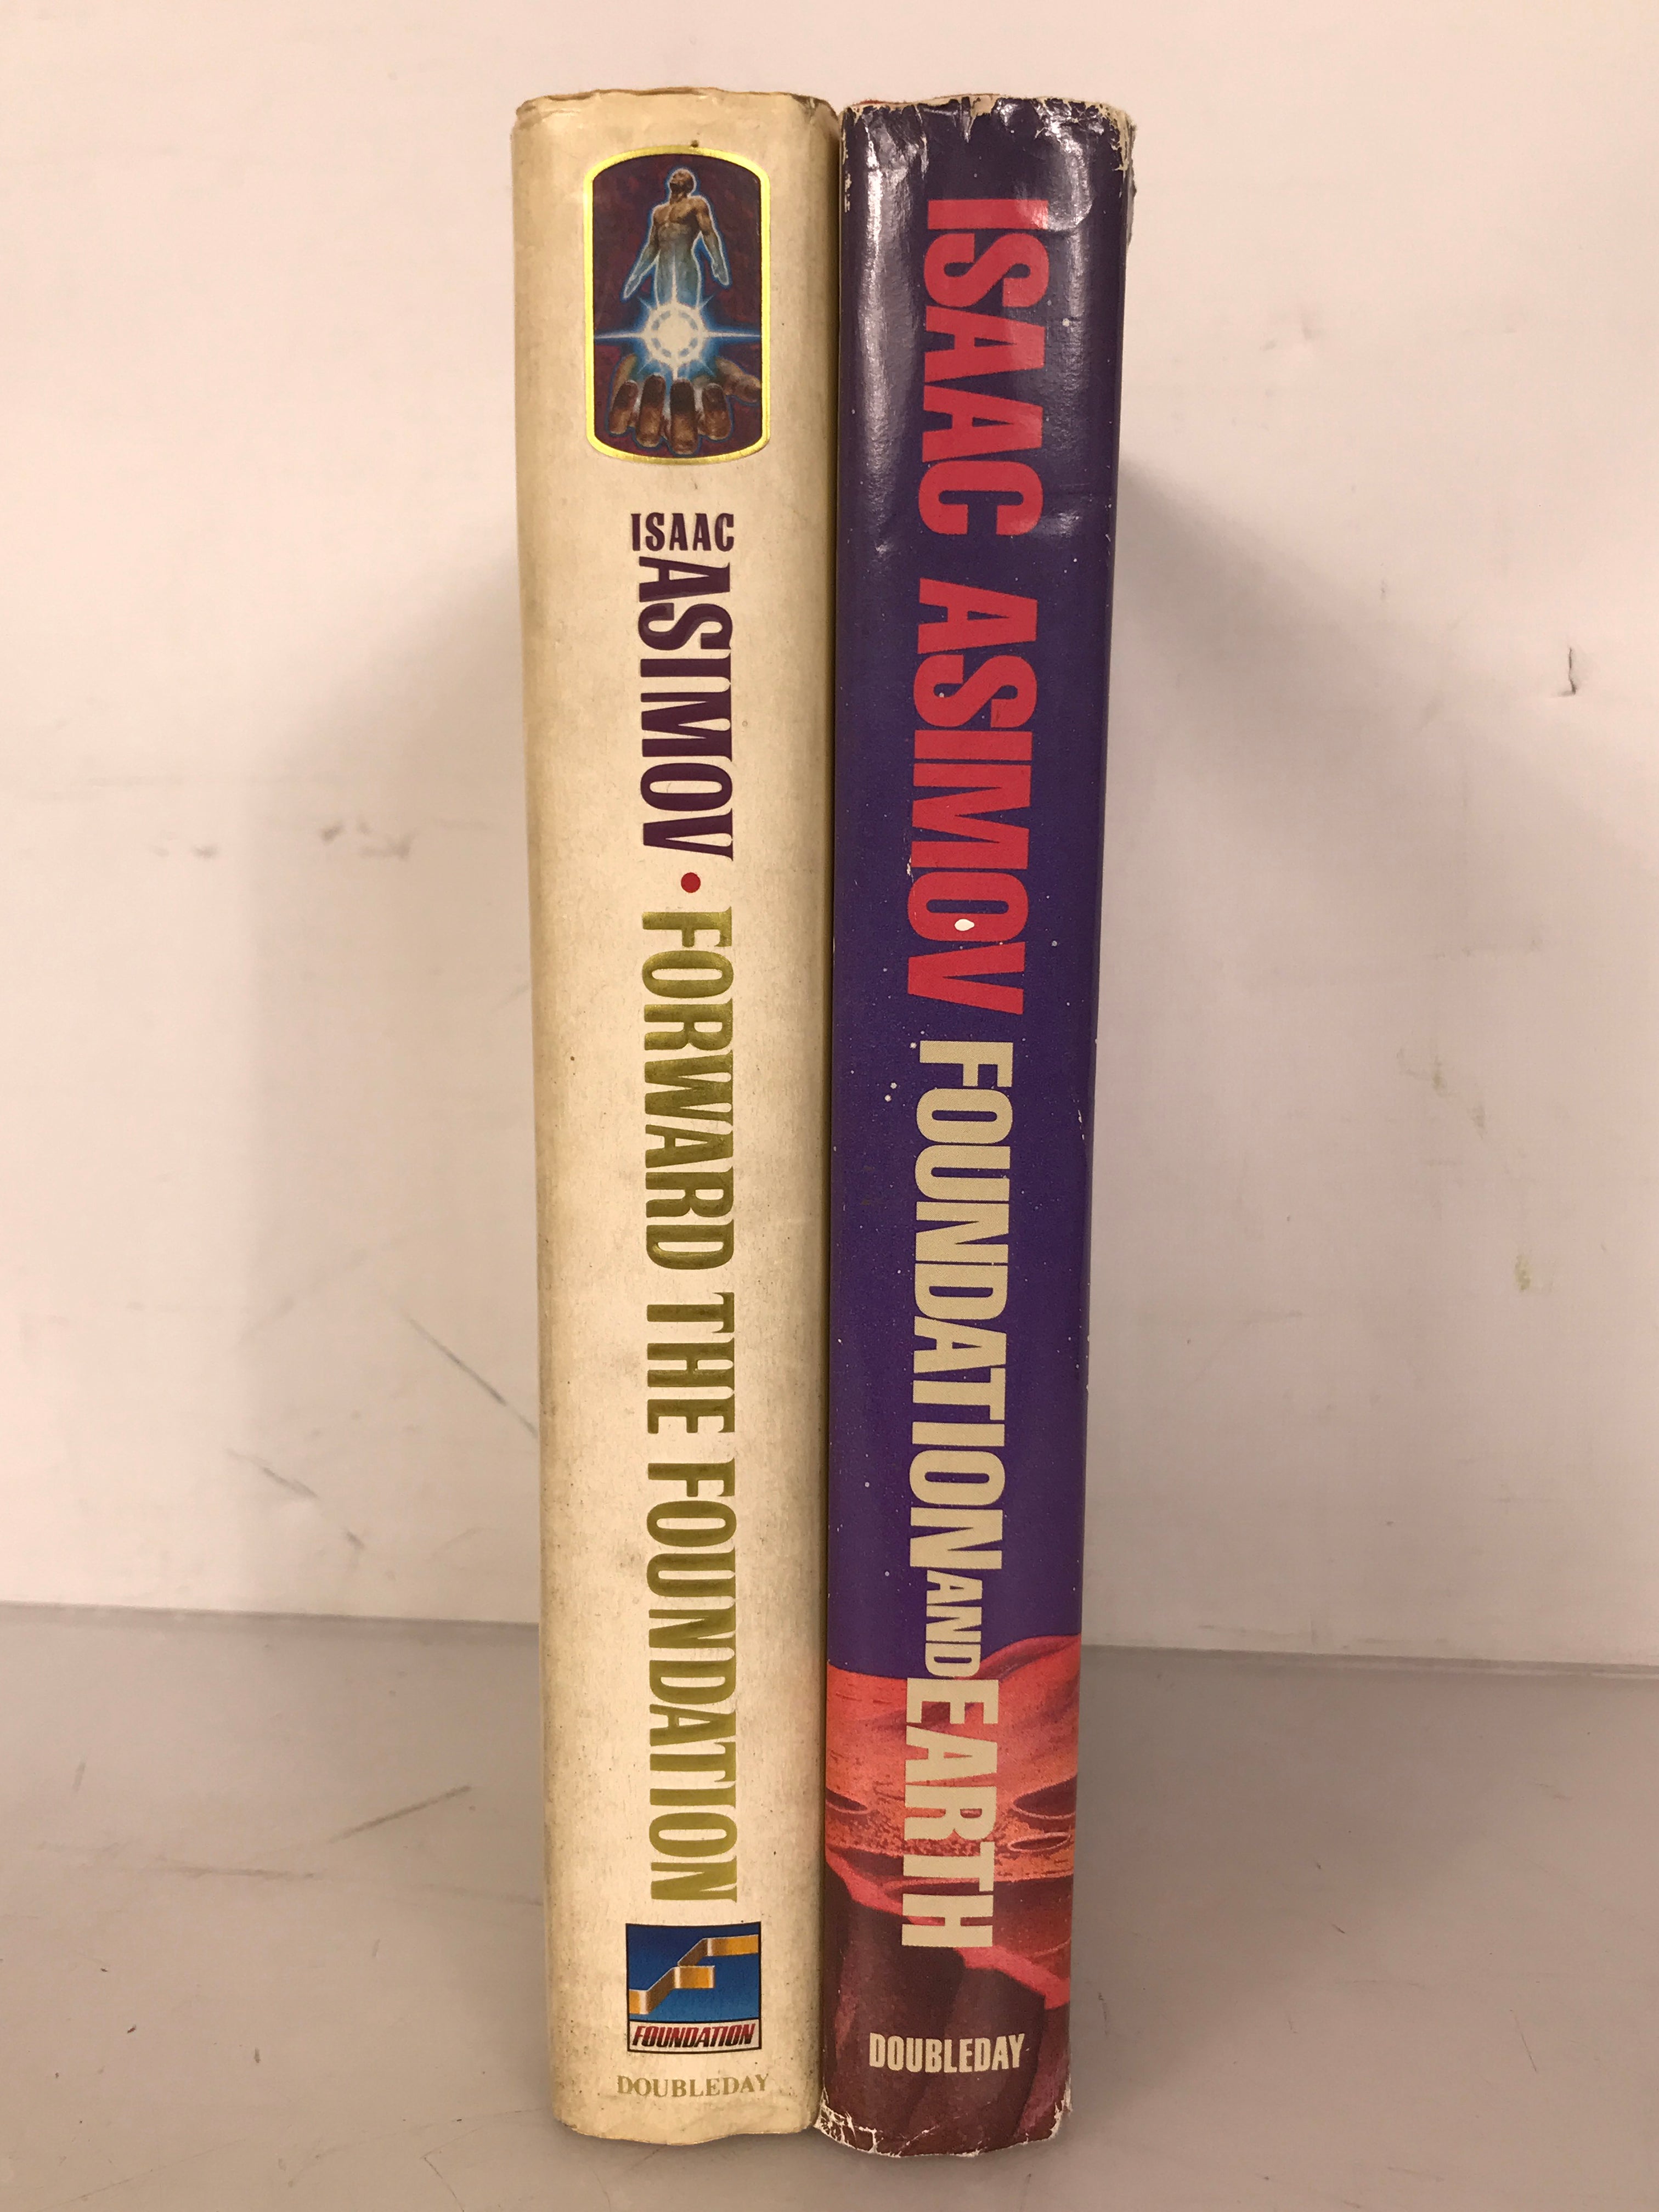 Lot of 2 Isaac Asimov: Foundation and Earth (1986 First Edition) and Forward the Foundation (1993) HC DJ